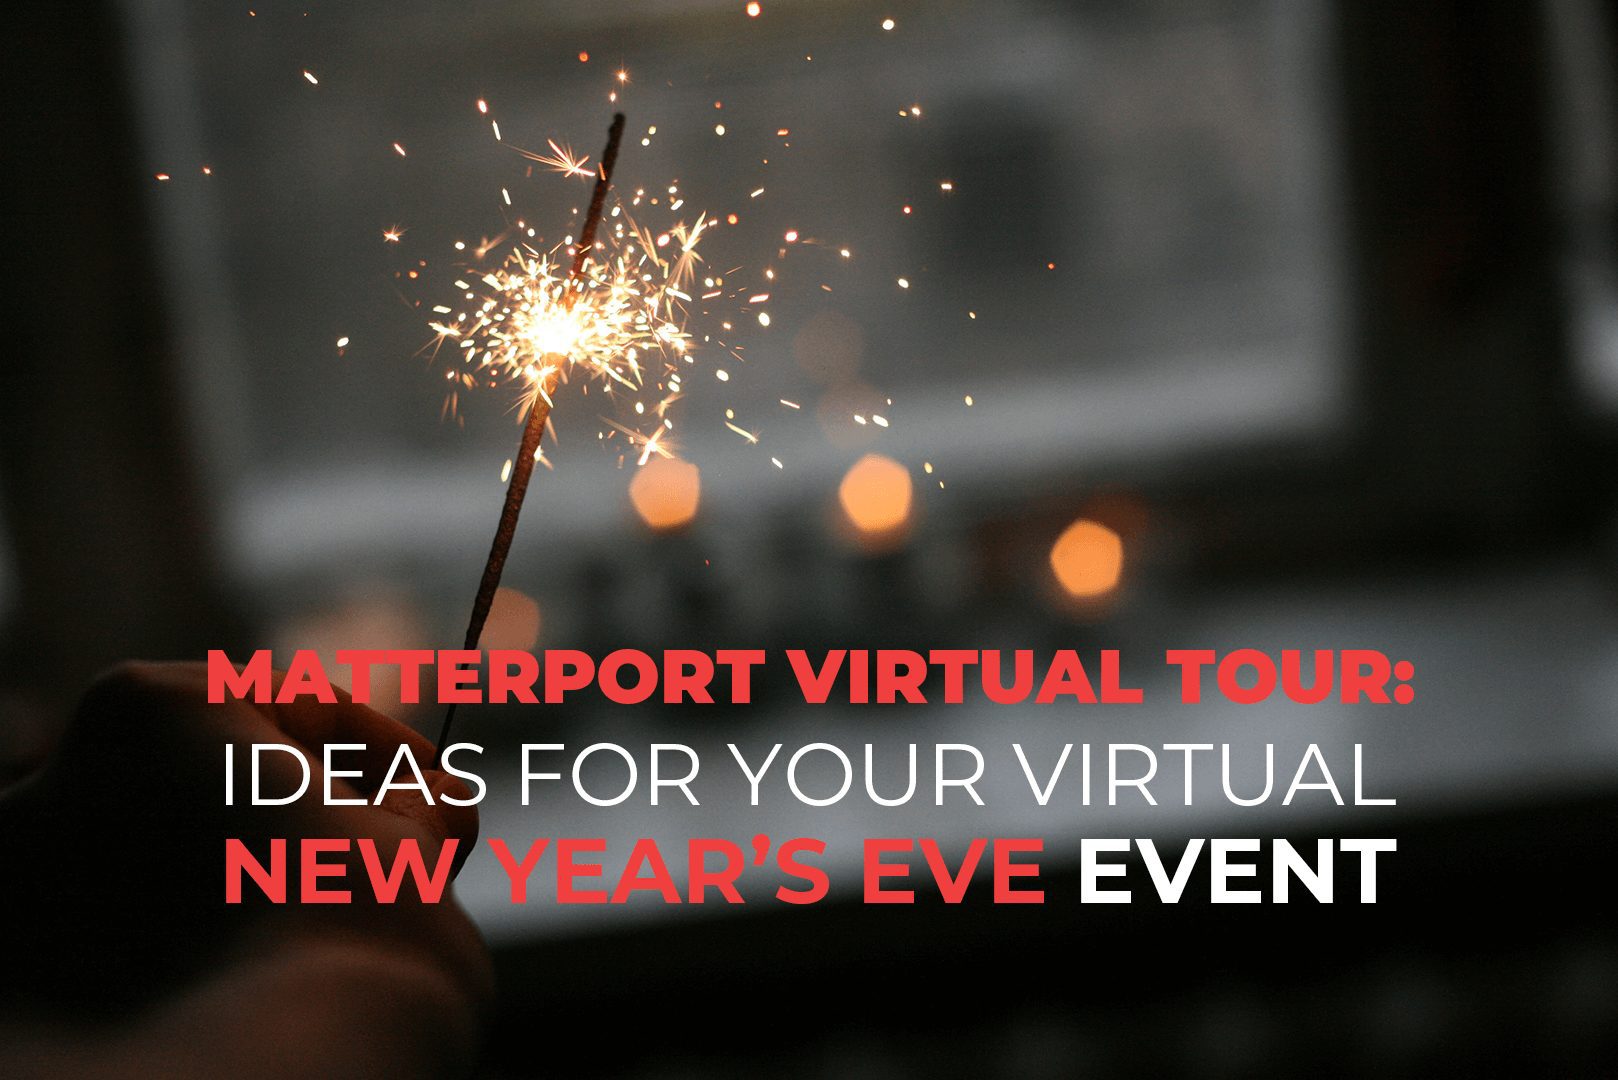 Matterport Virtual Tour Ideas For Your Virtual New Year’s Eve Event